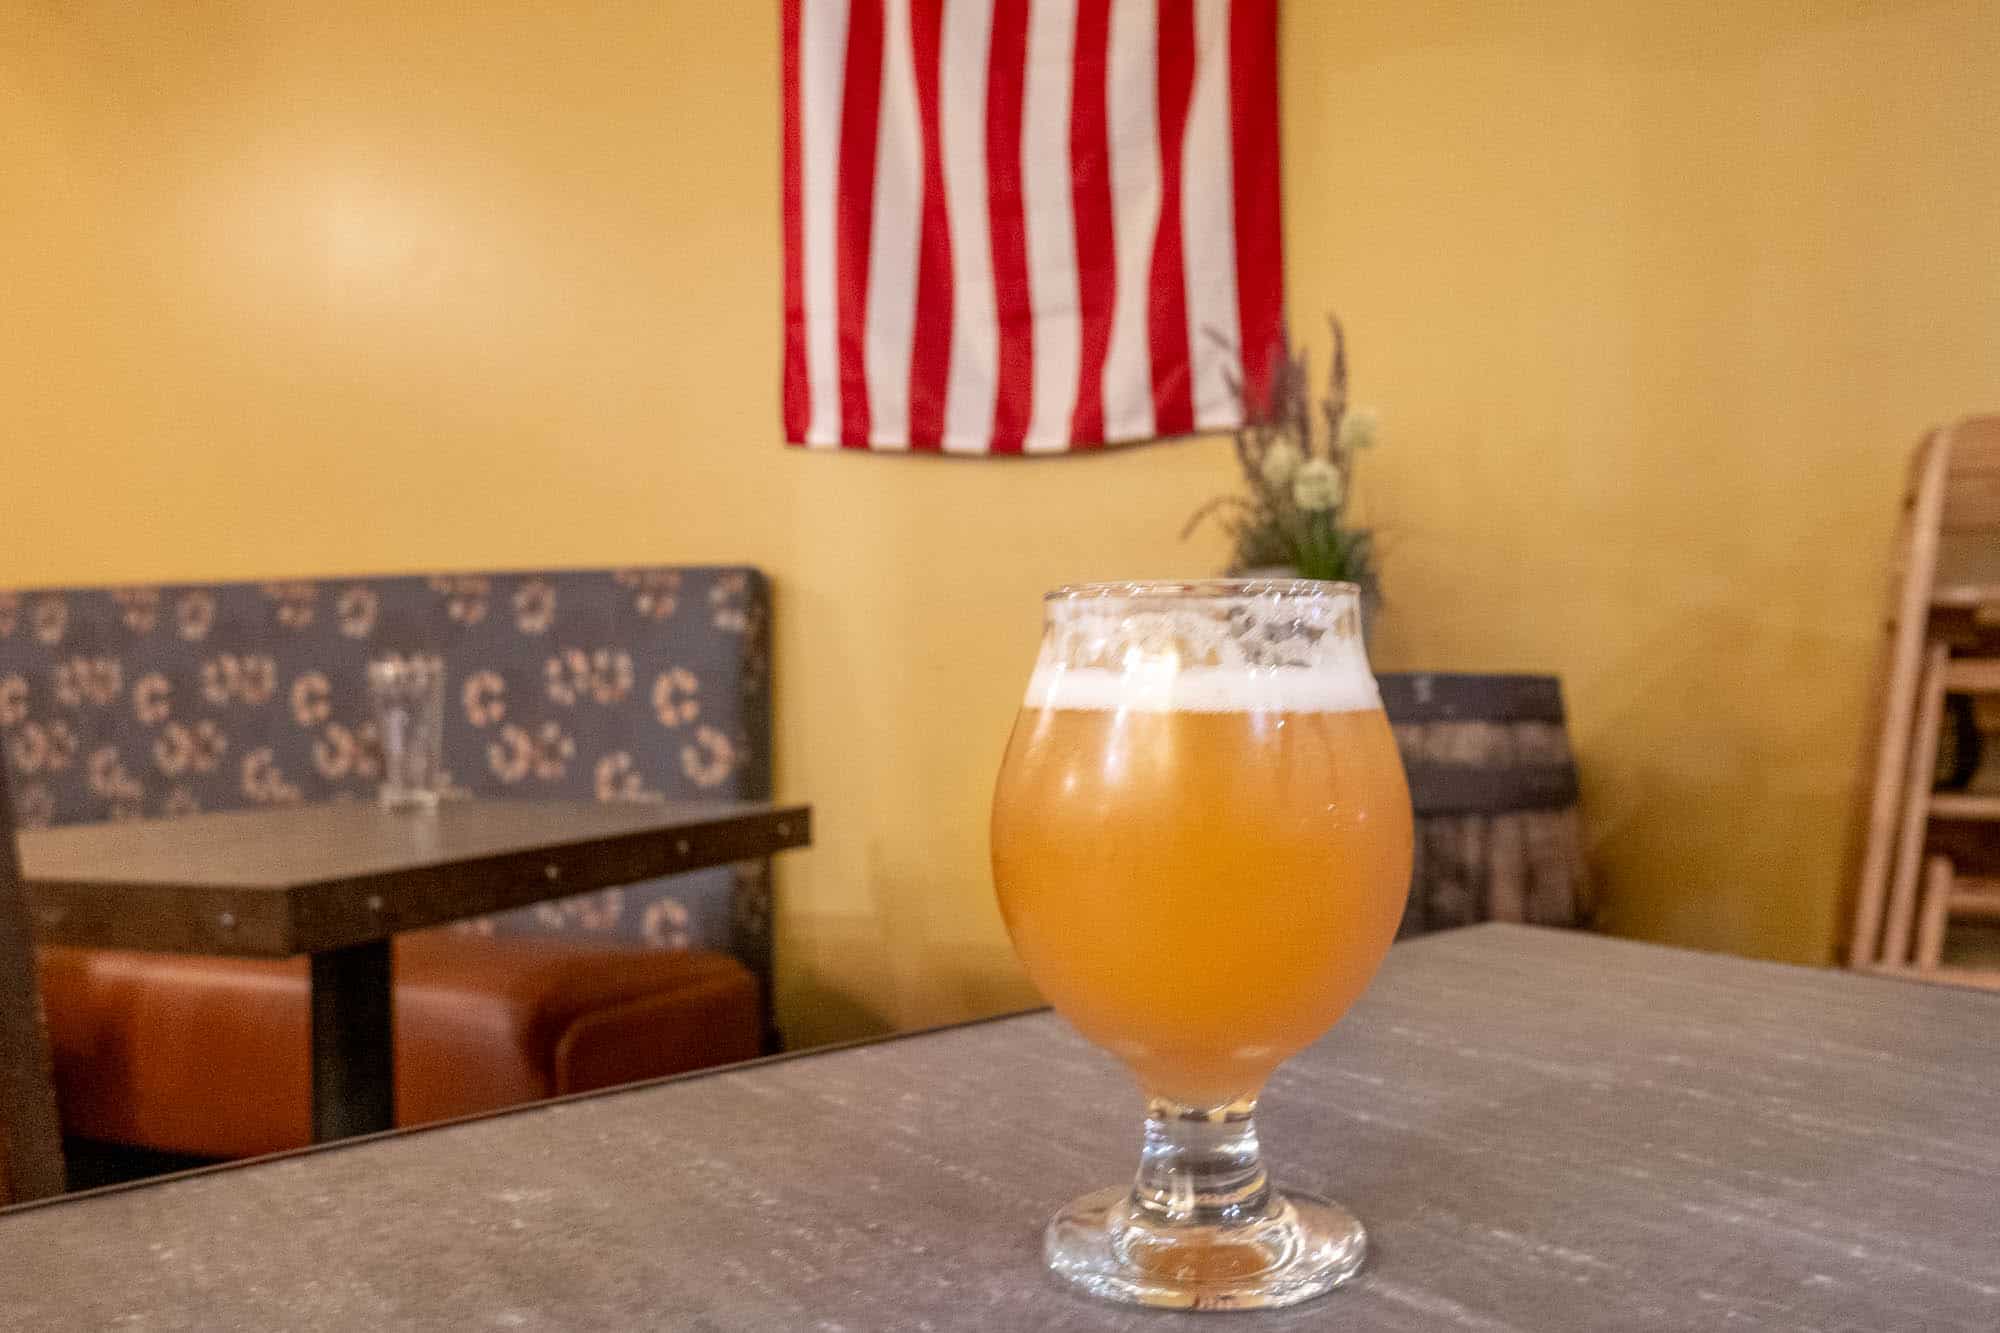 Glass of beer on table with American flag in background